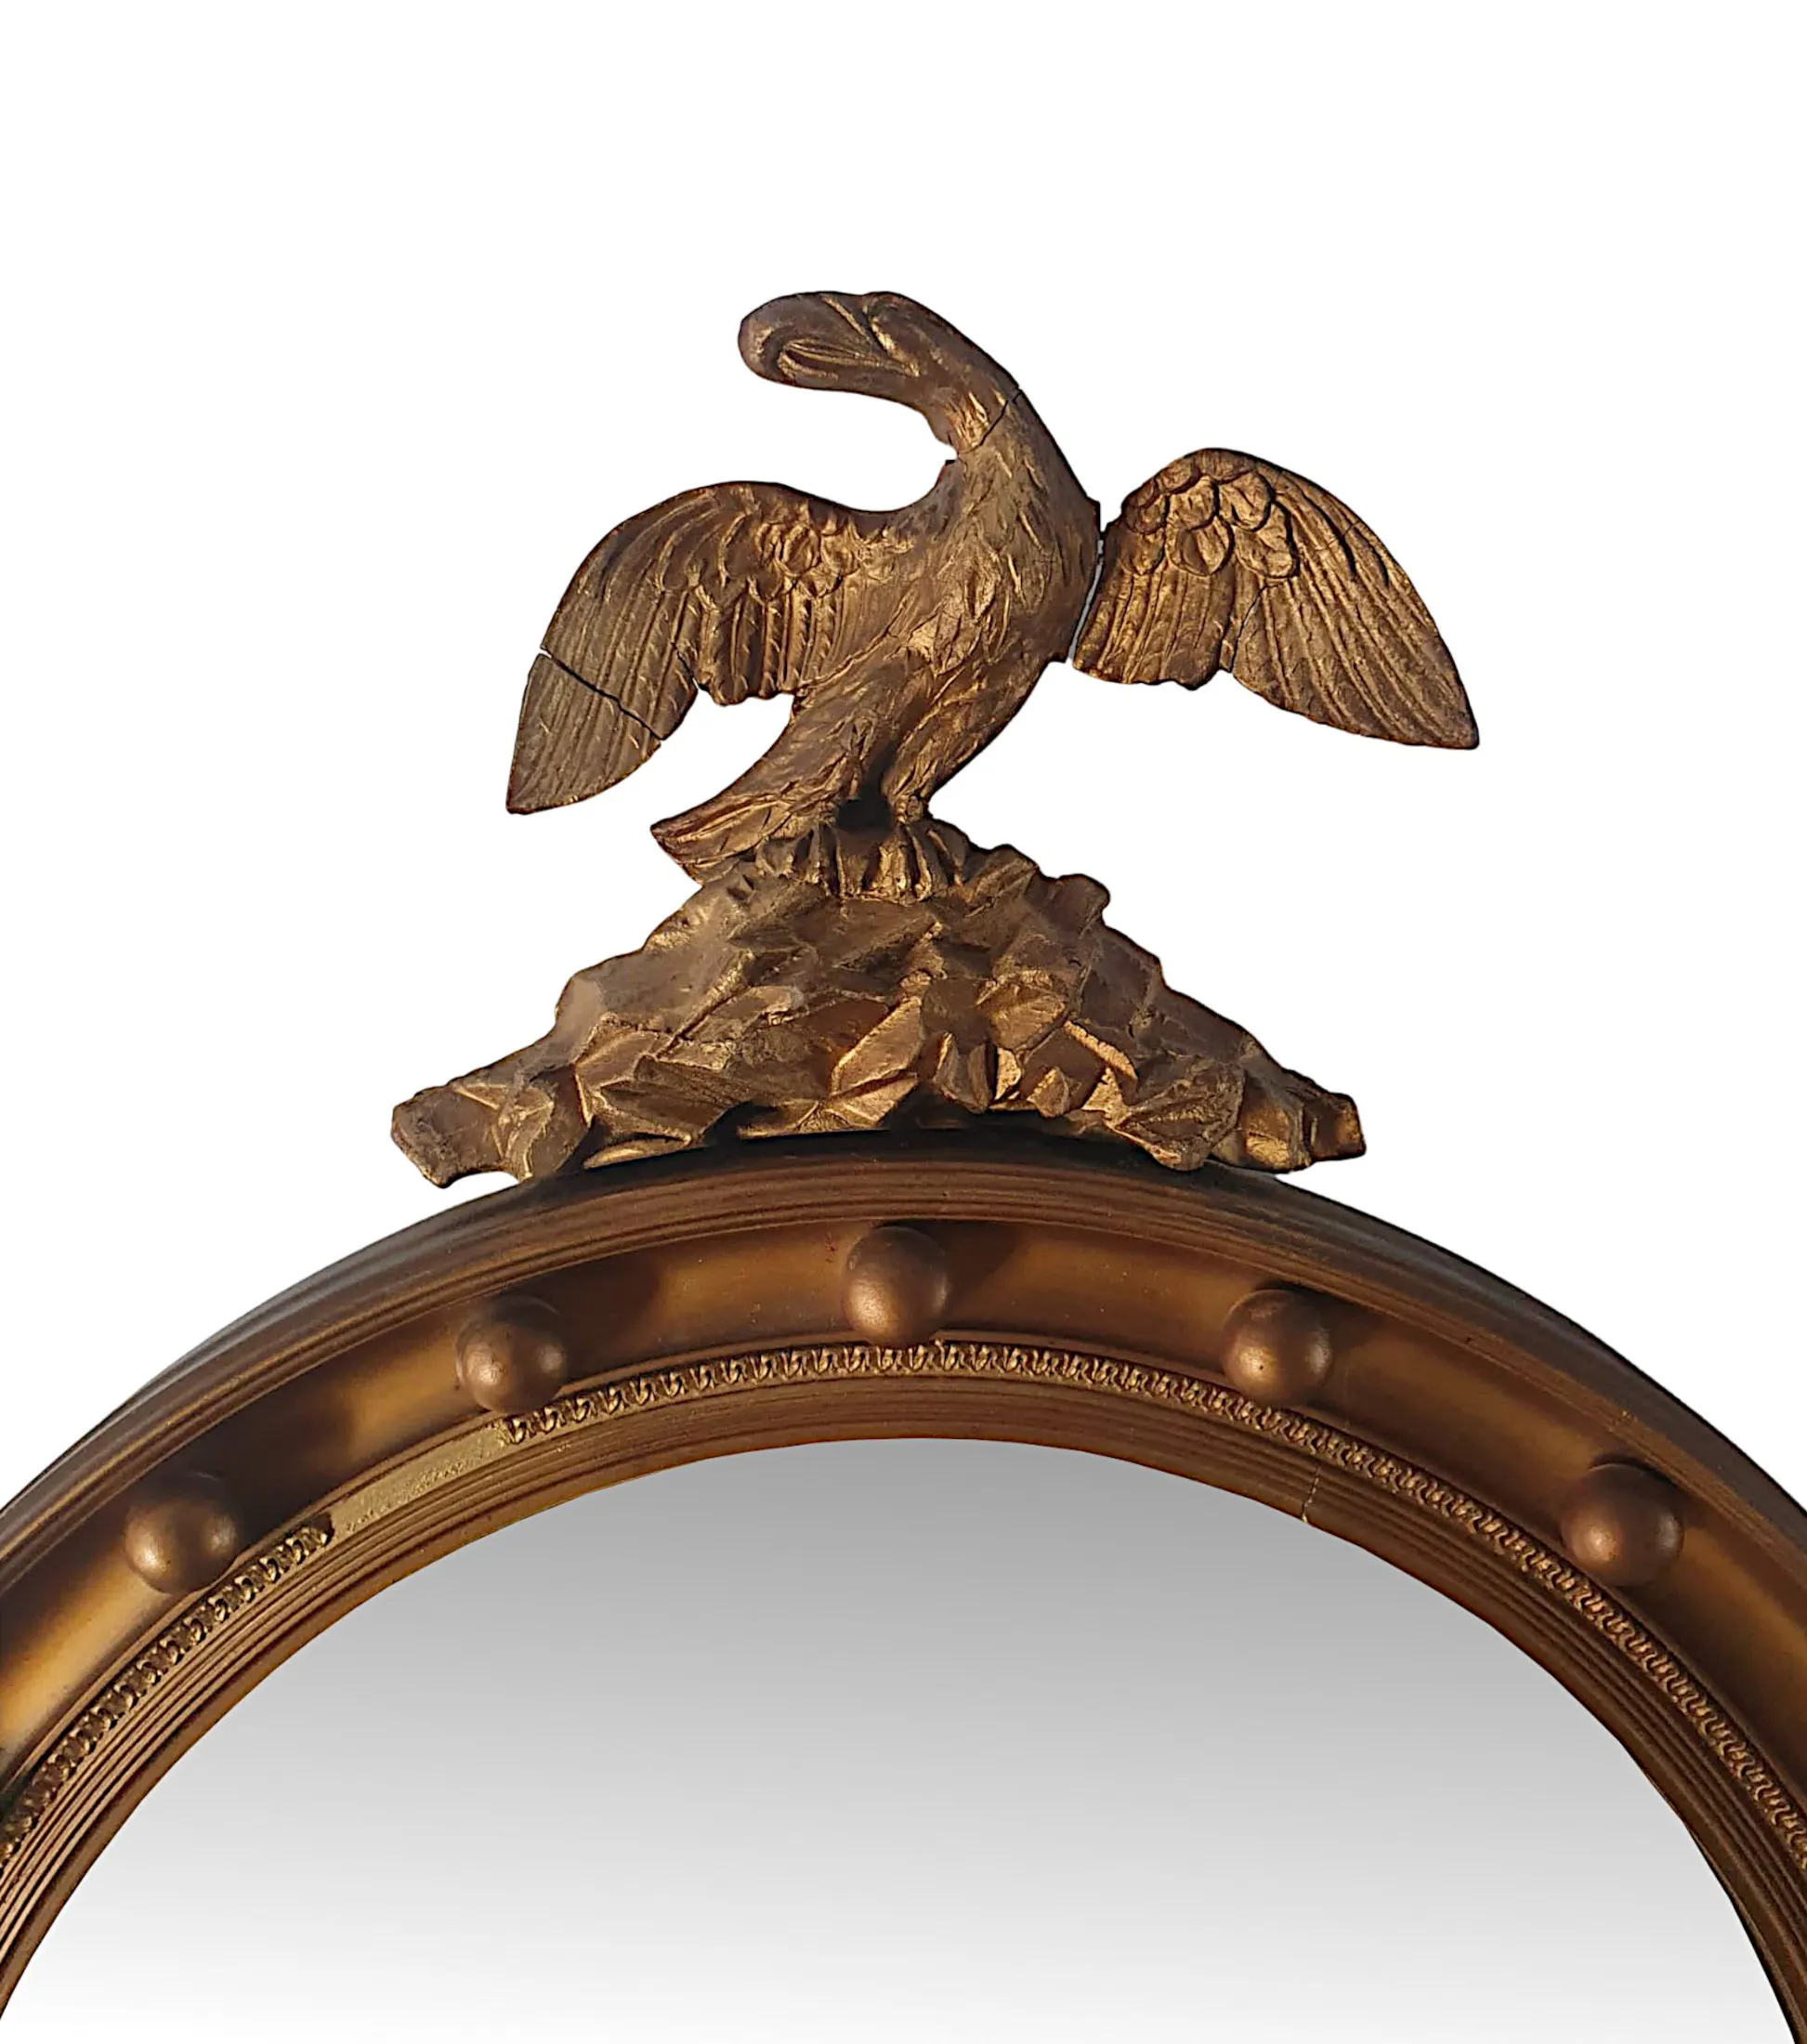 A Stunning 19th Century Giltwood Mirror with Eagle Crest